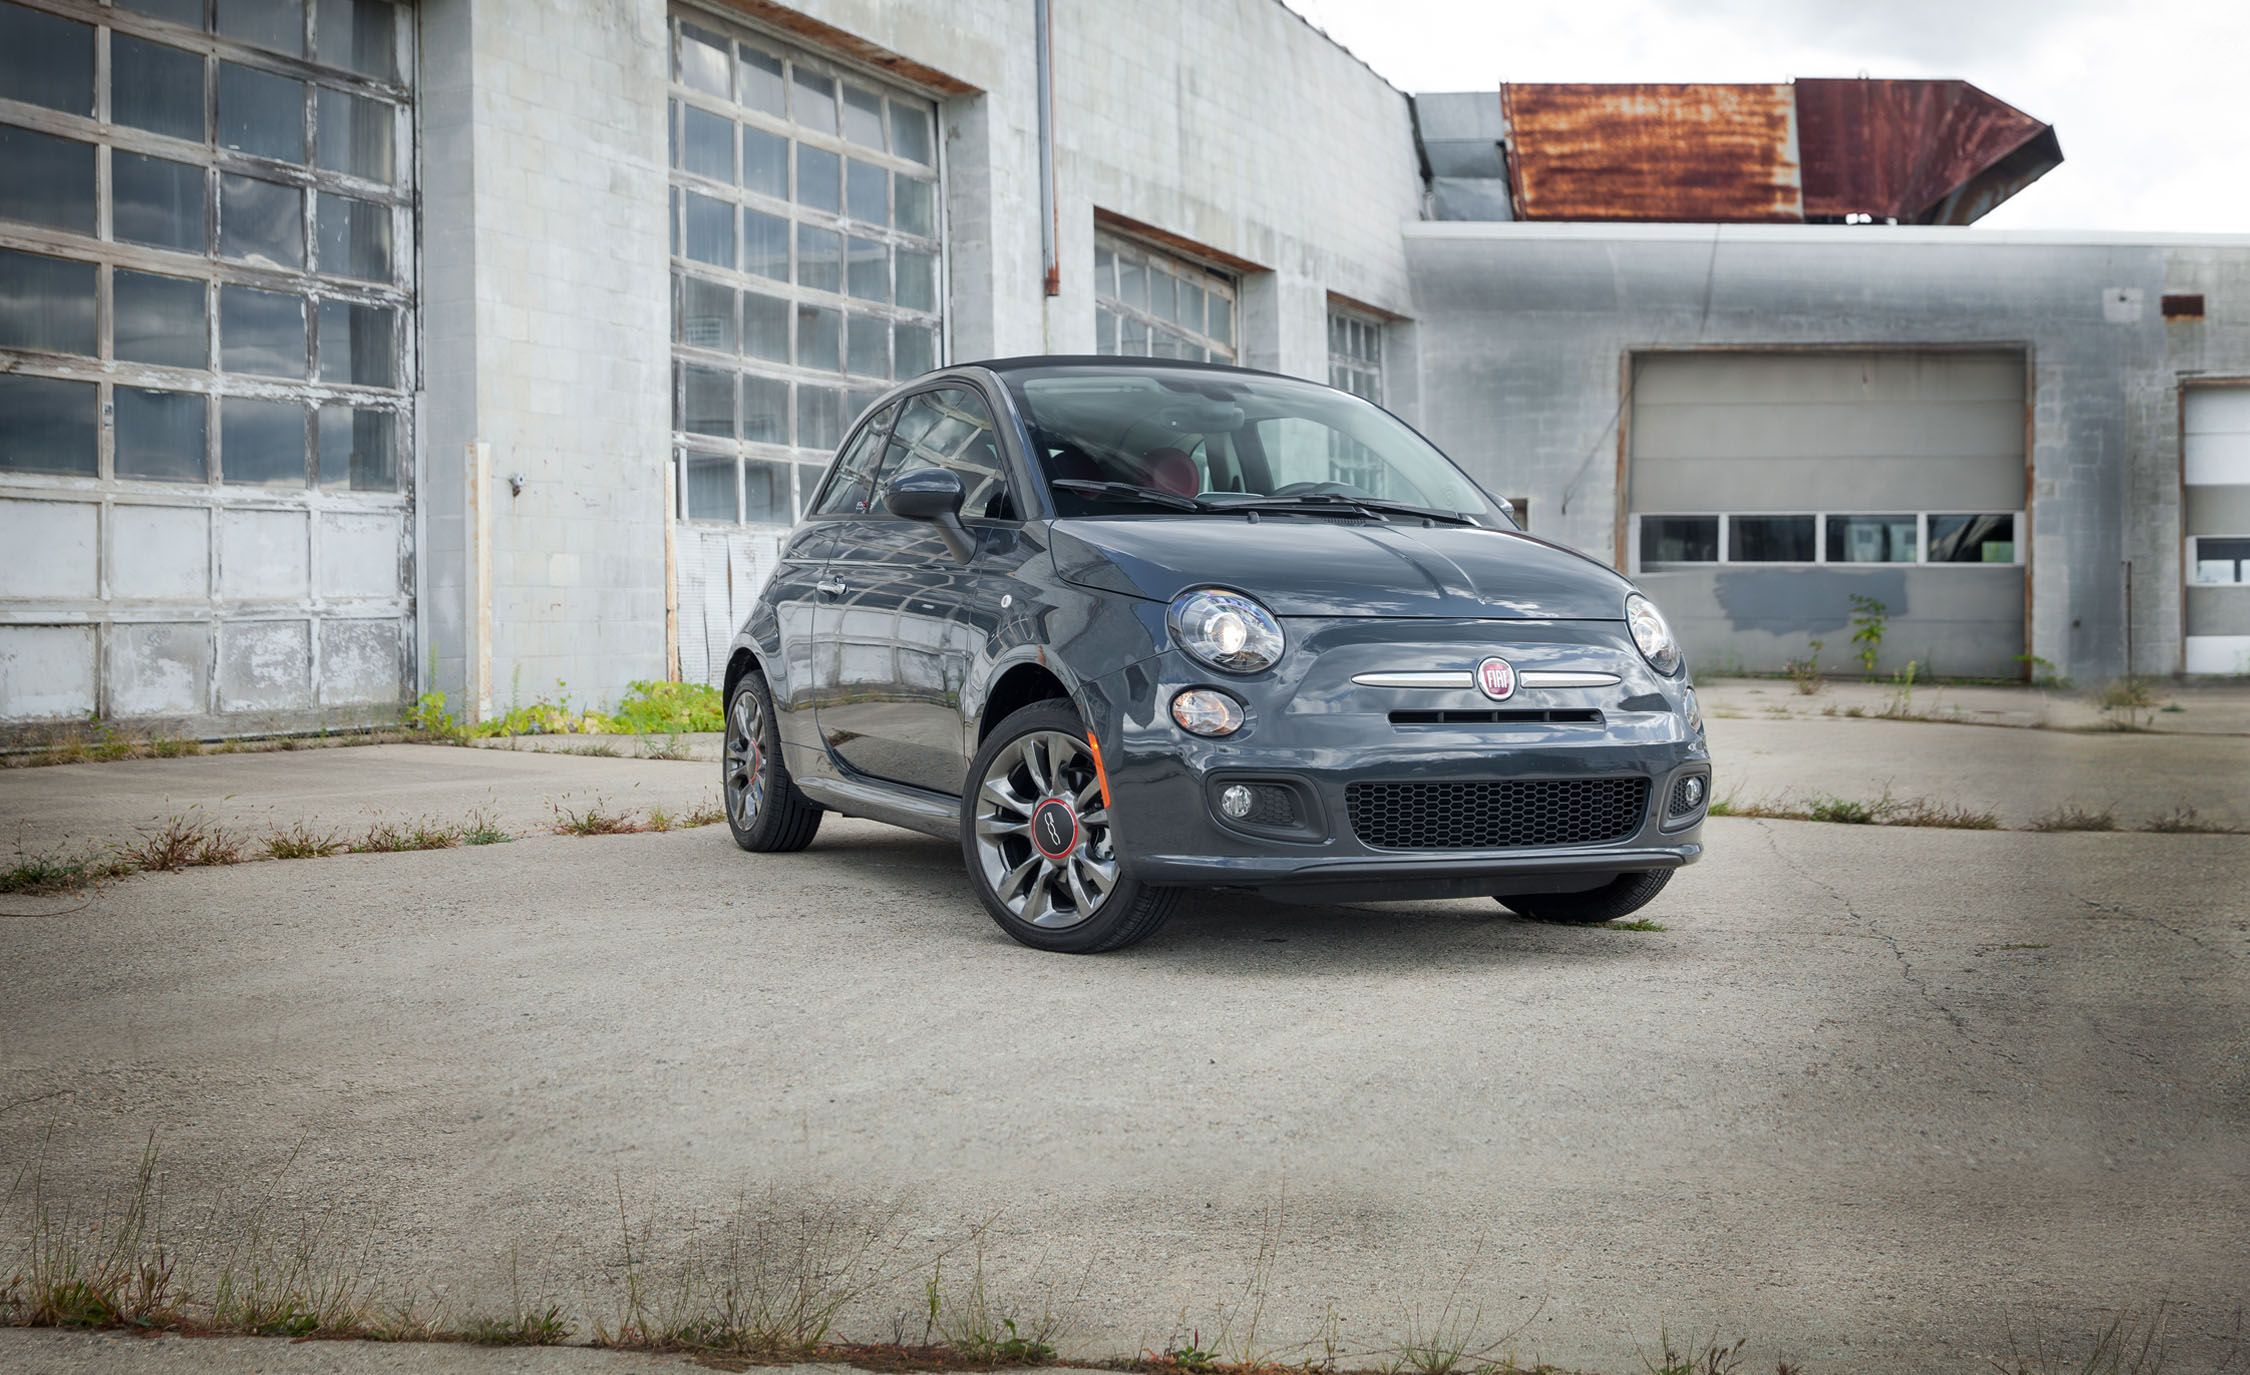 buurman Grommen Recensie 2017 Fiat 500C Manual Test | Review | Car and Driver